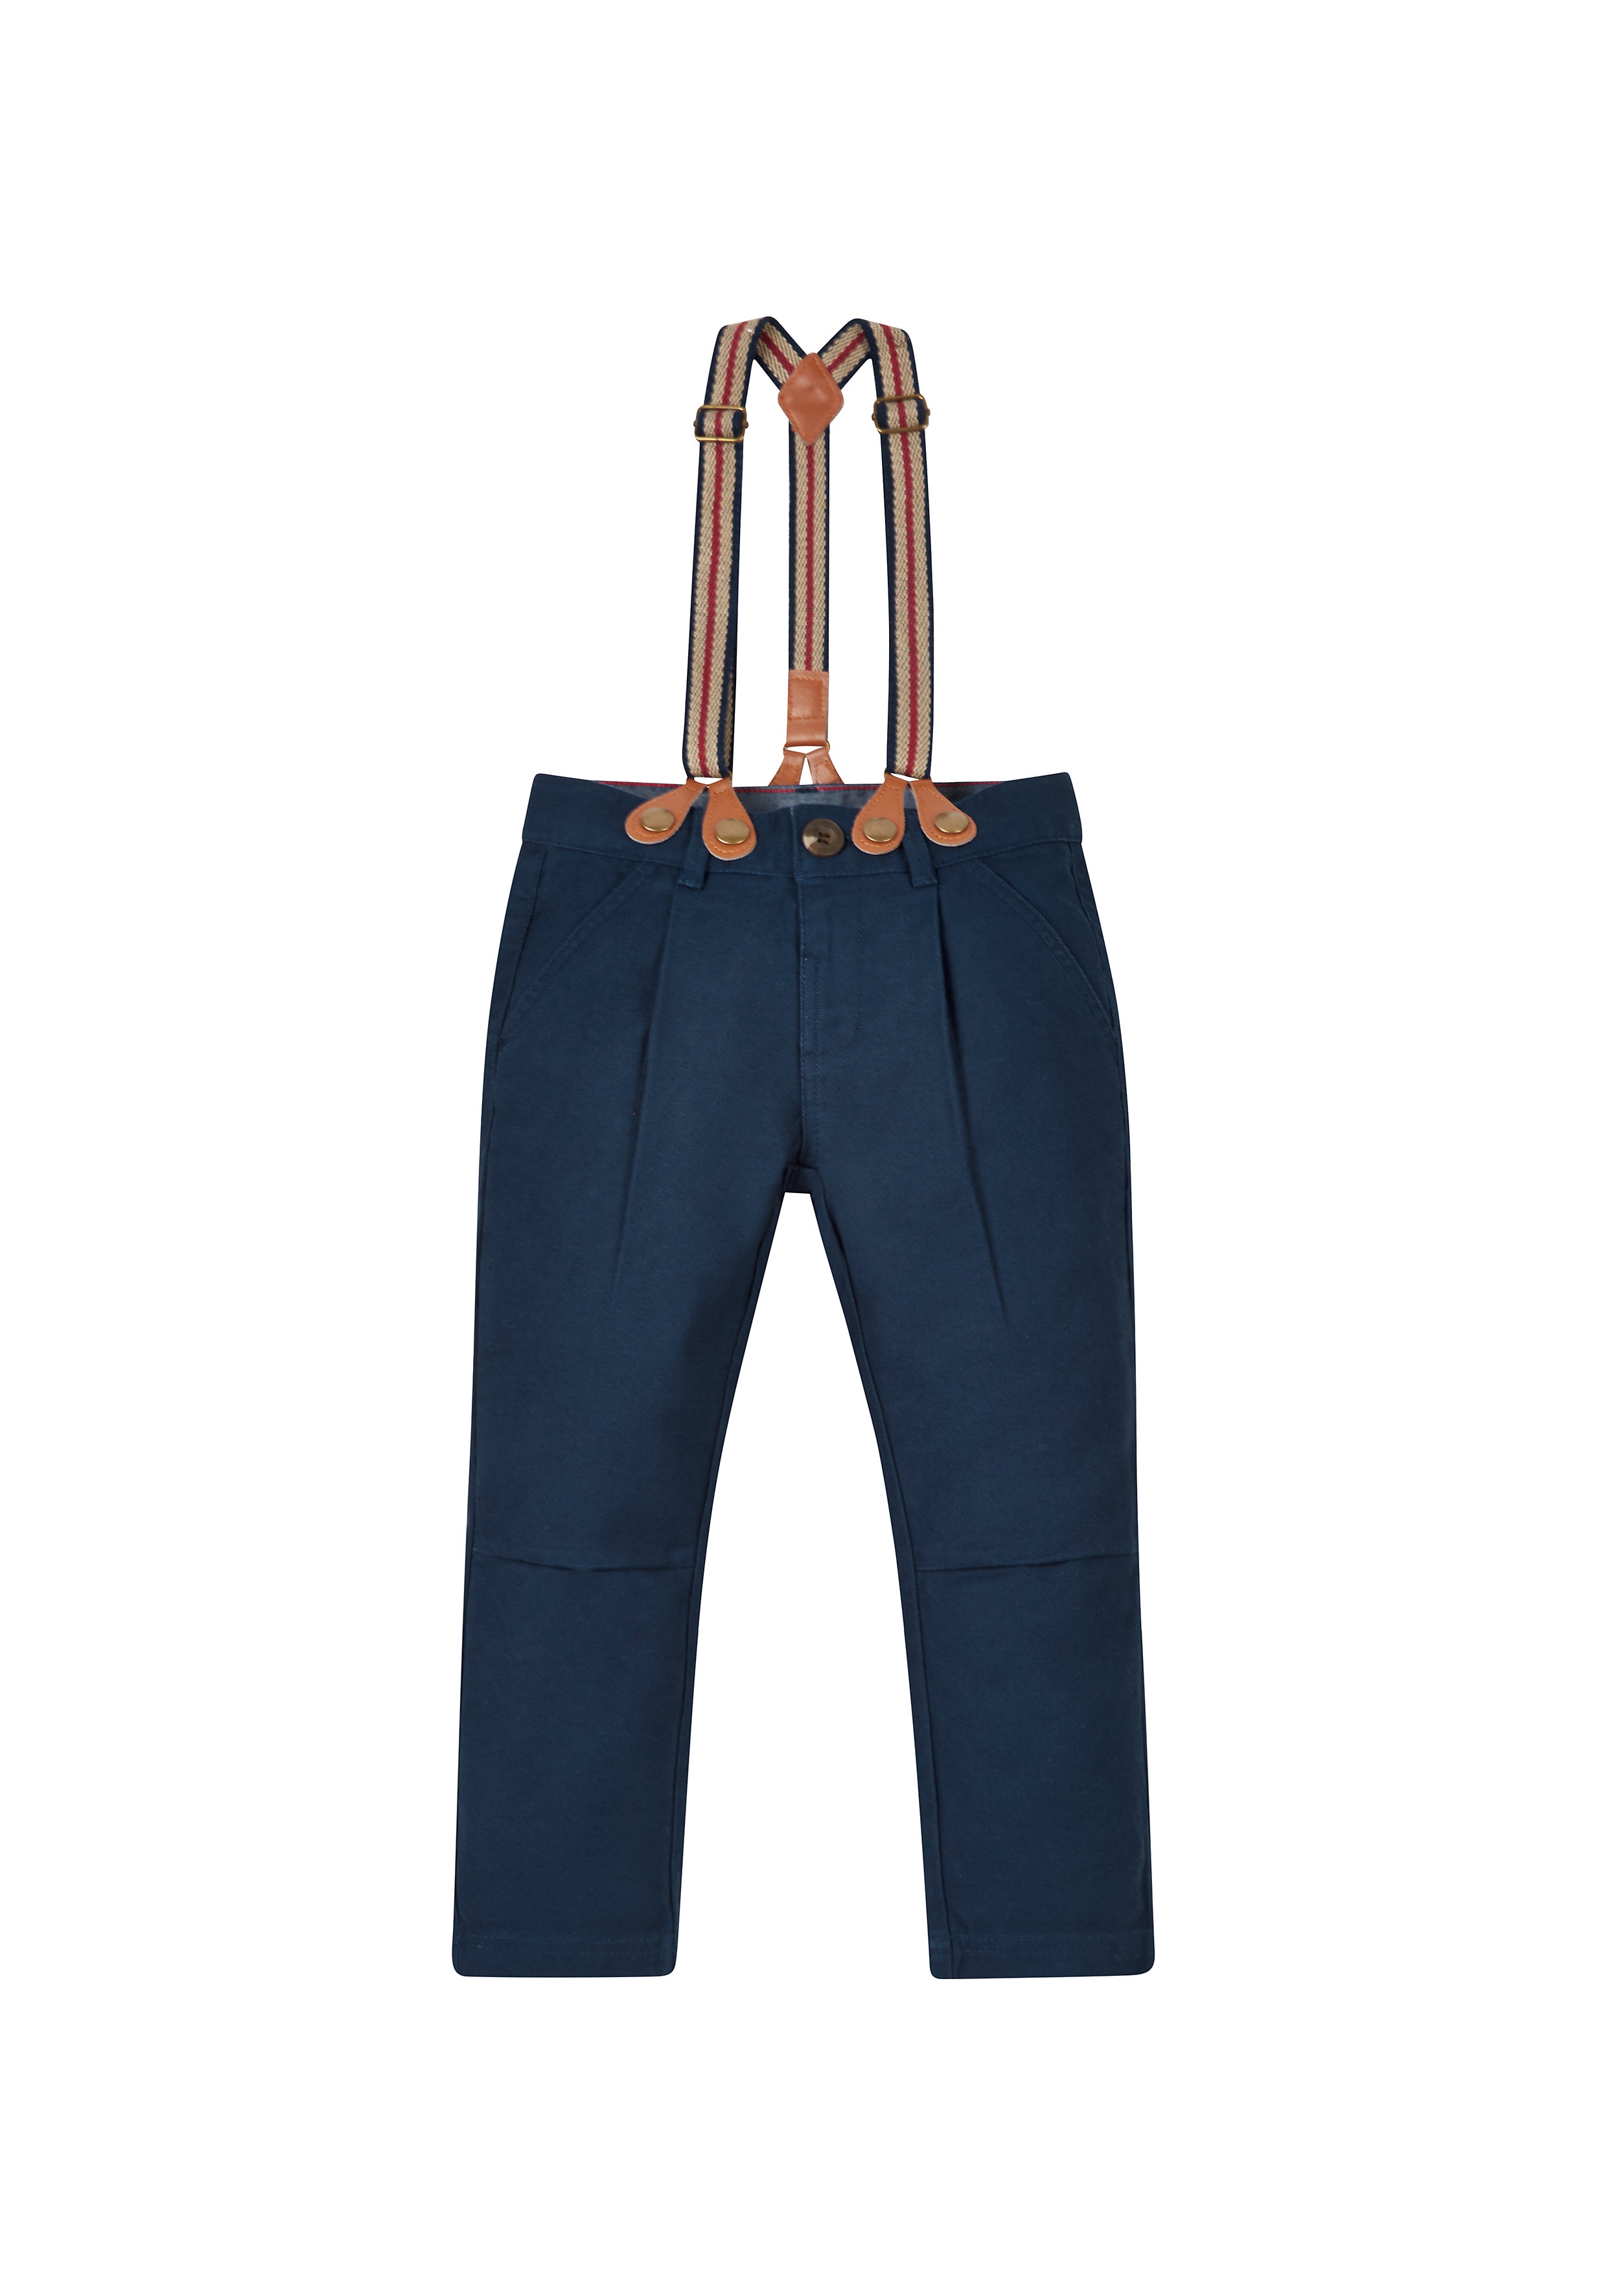 Mothercare | Boys Chino Trousers With Braces - Navy